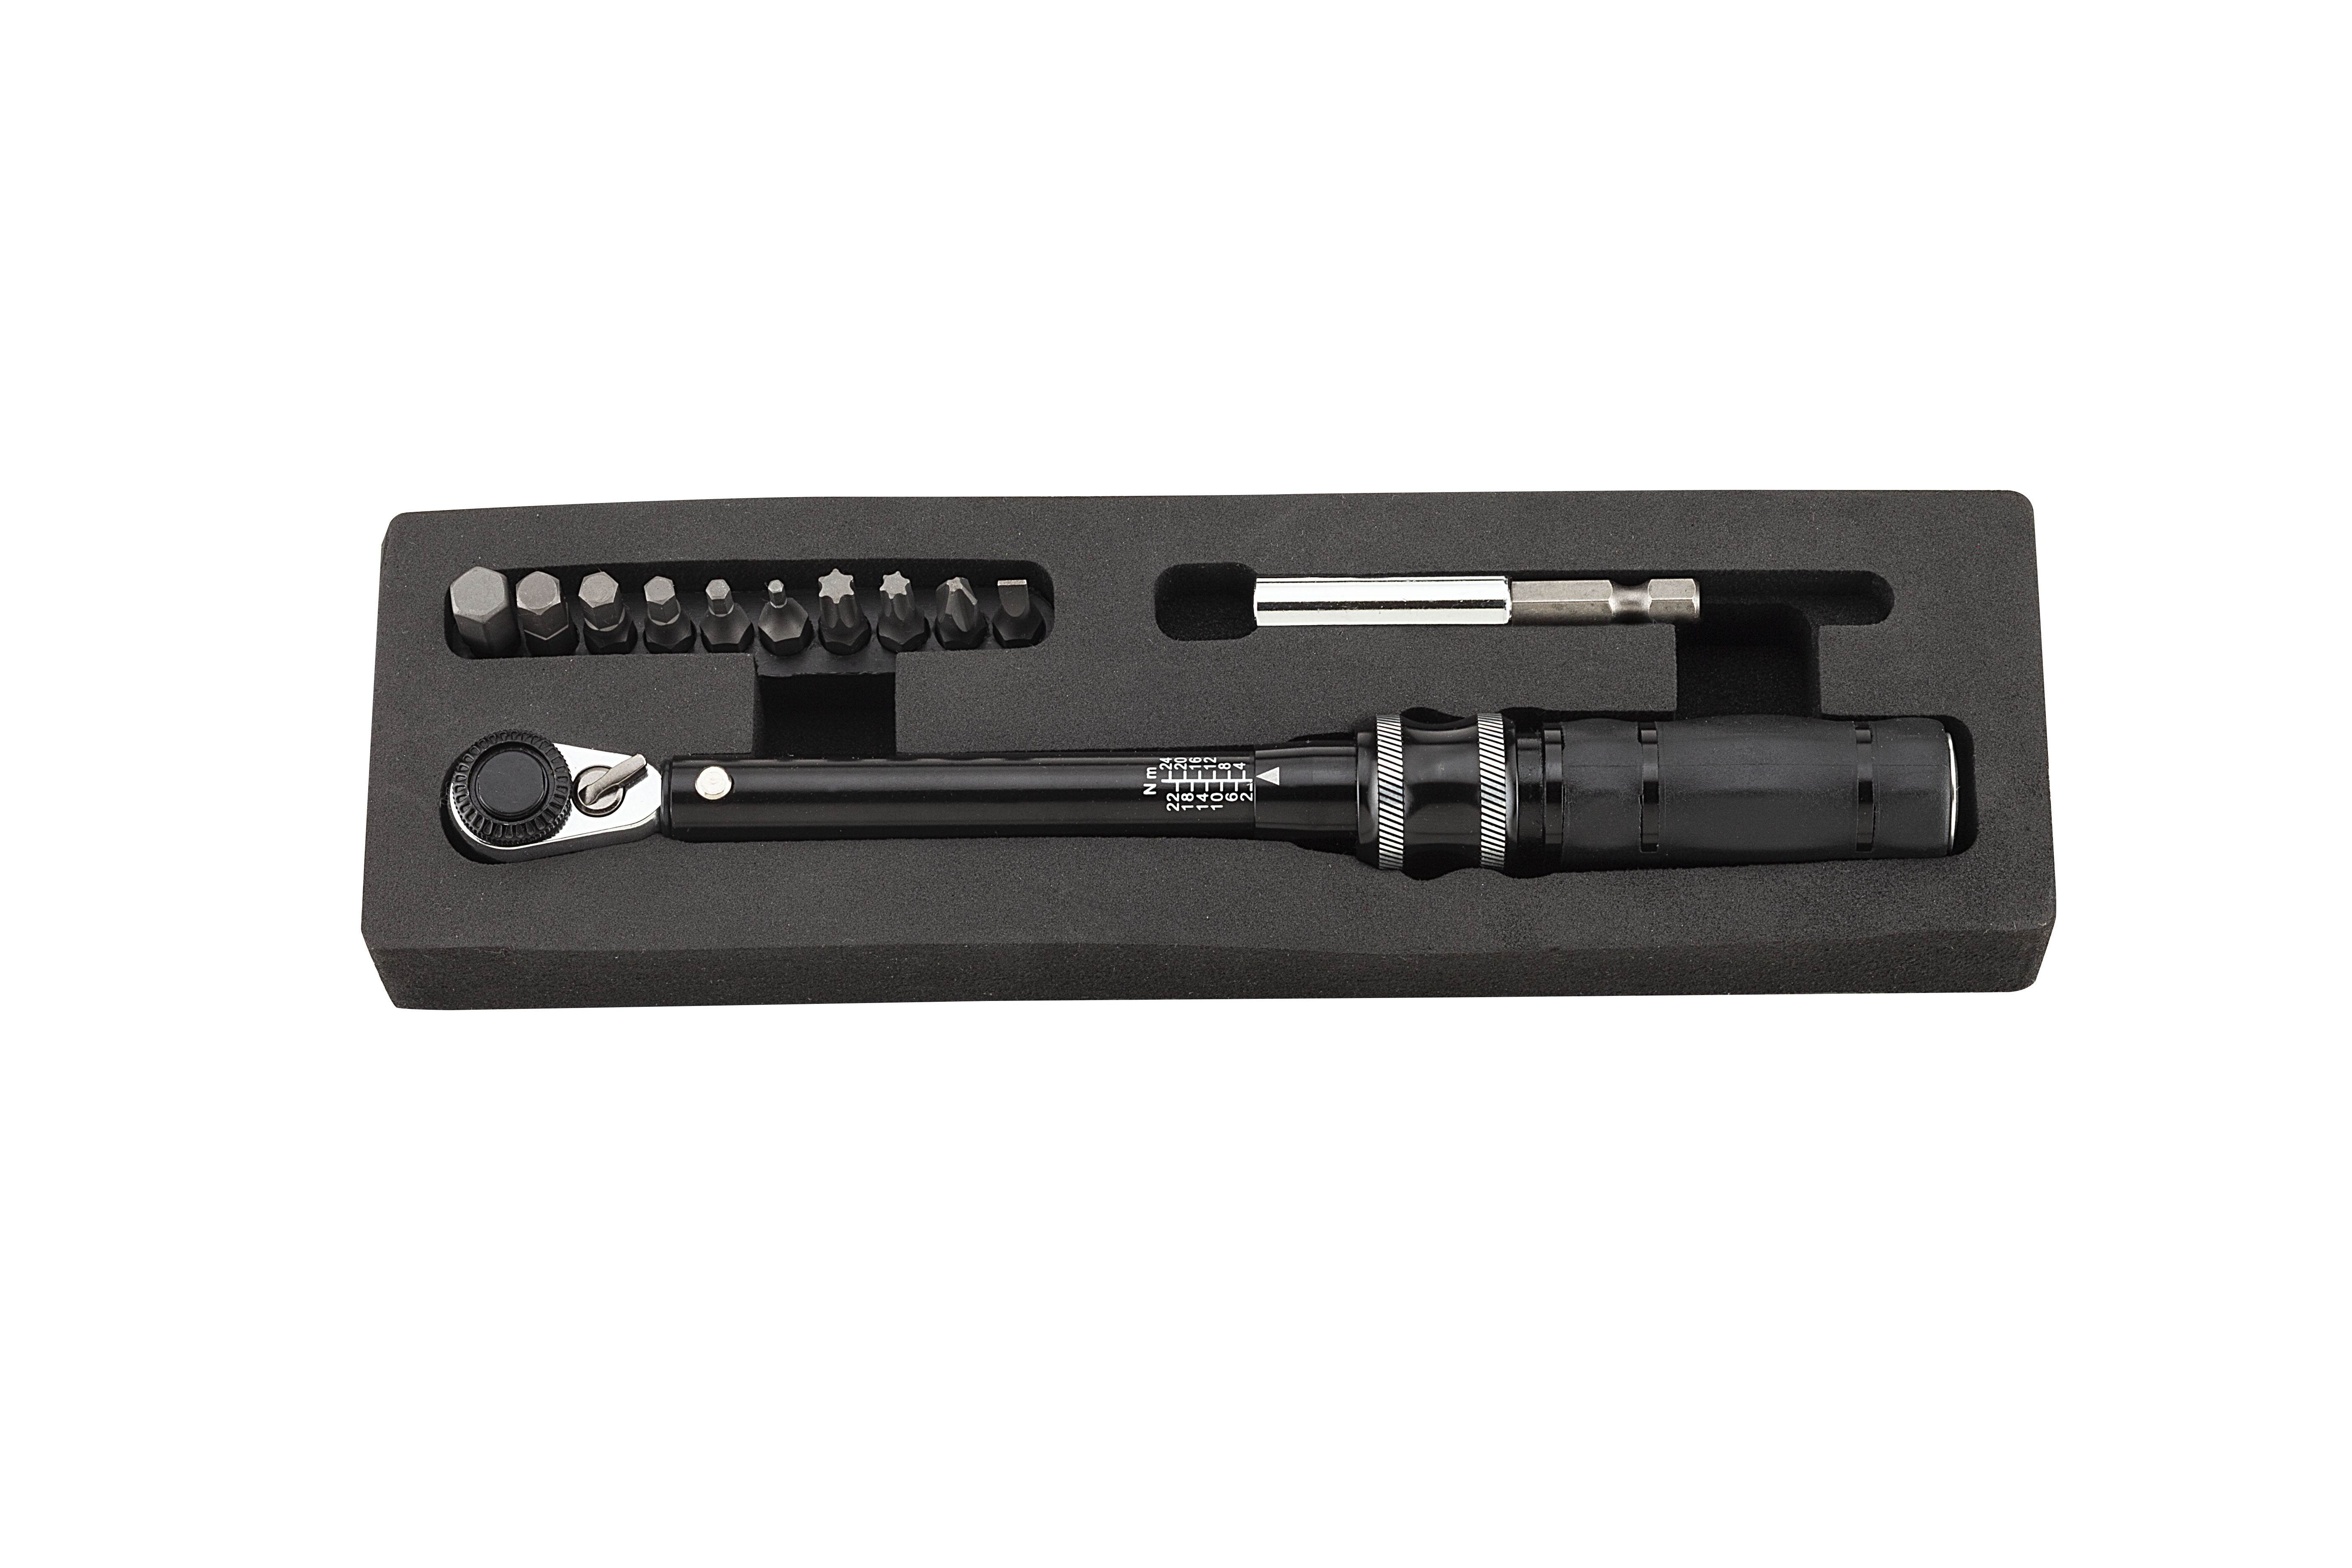 1/4"DR 2-24Nm adjustable torque wrench